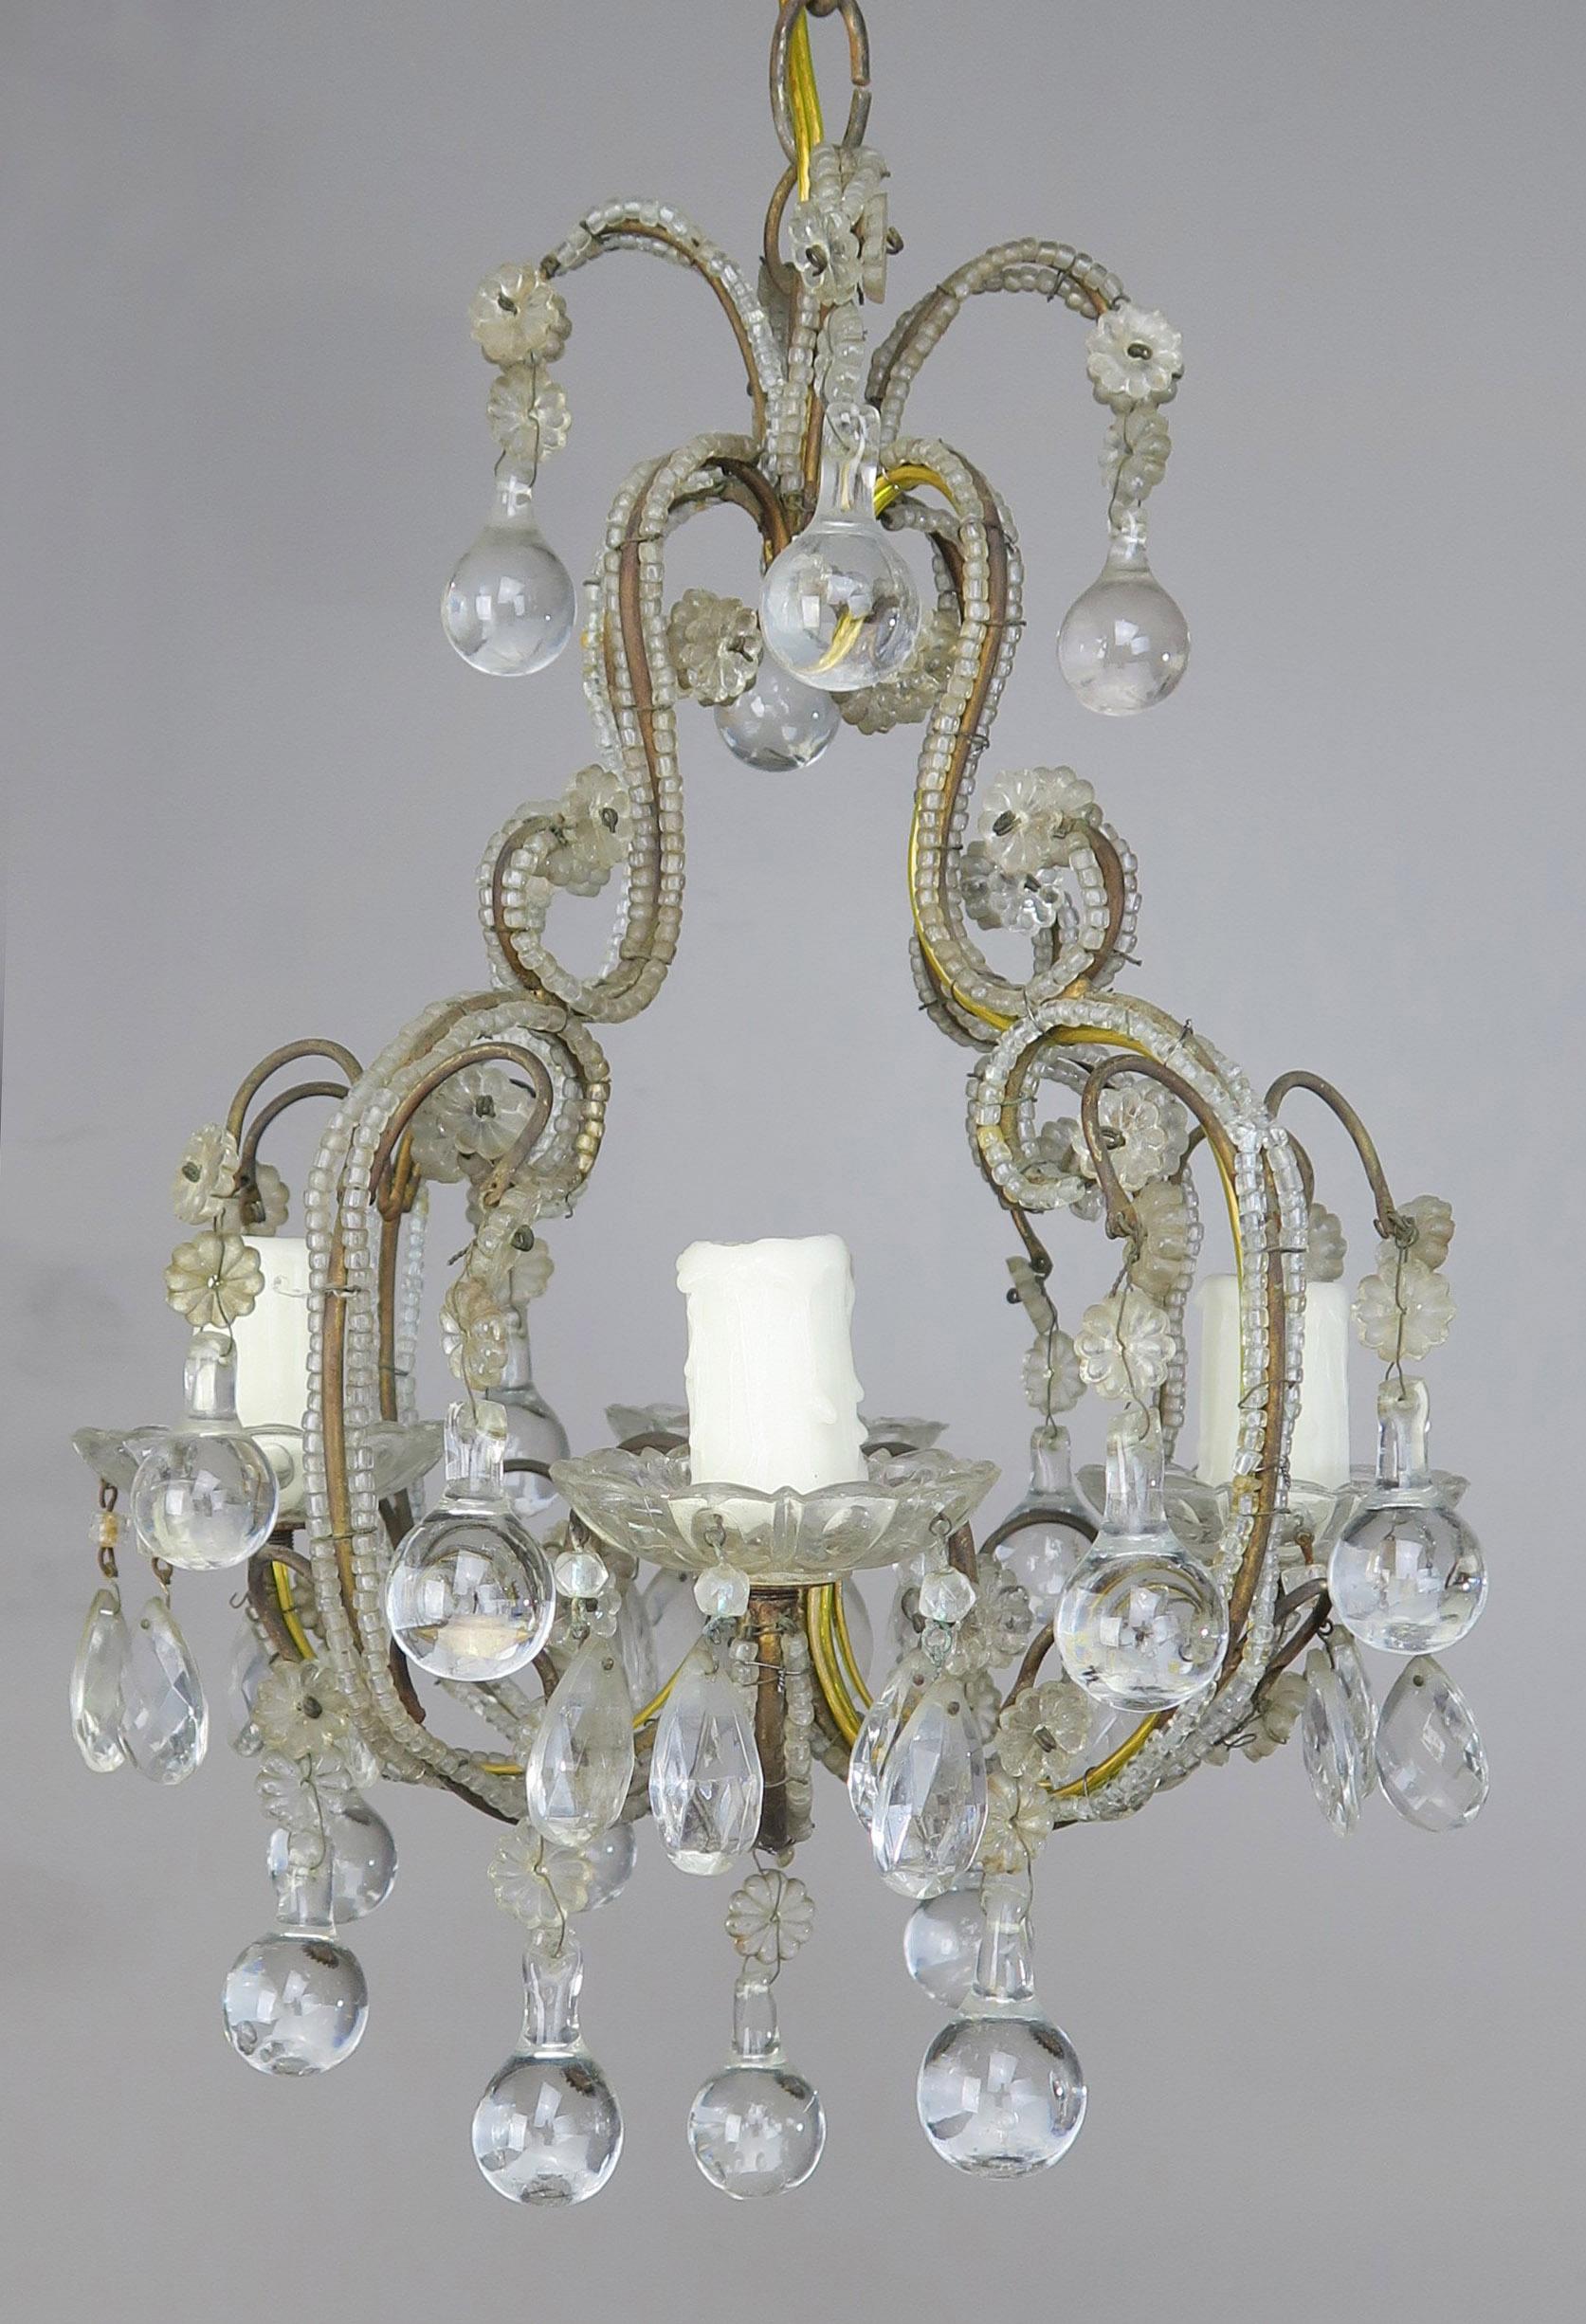 French four-light crystal beaded chandelier with clear drops. The metal frame is all scrolled and beaded throughout. The fixture is newly rewired with drip wax candle covers. Ready to install and includes chain and canopy.